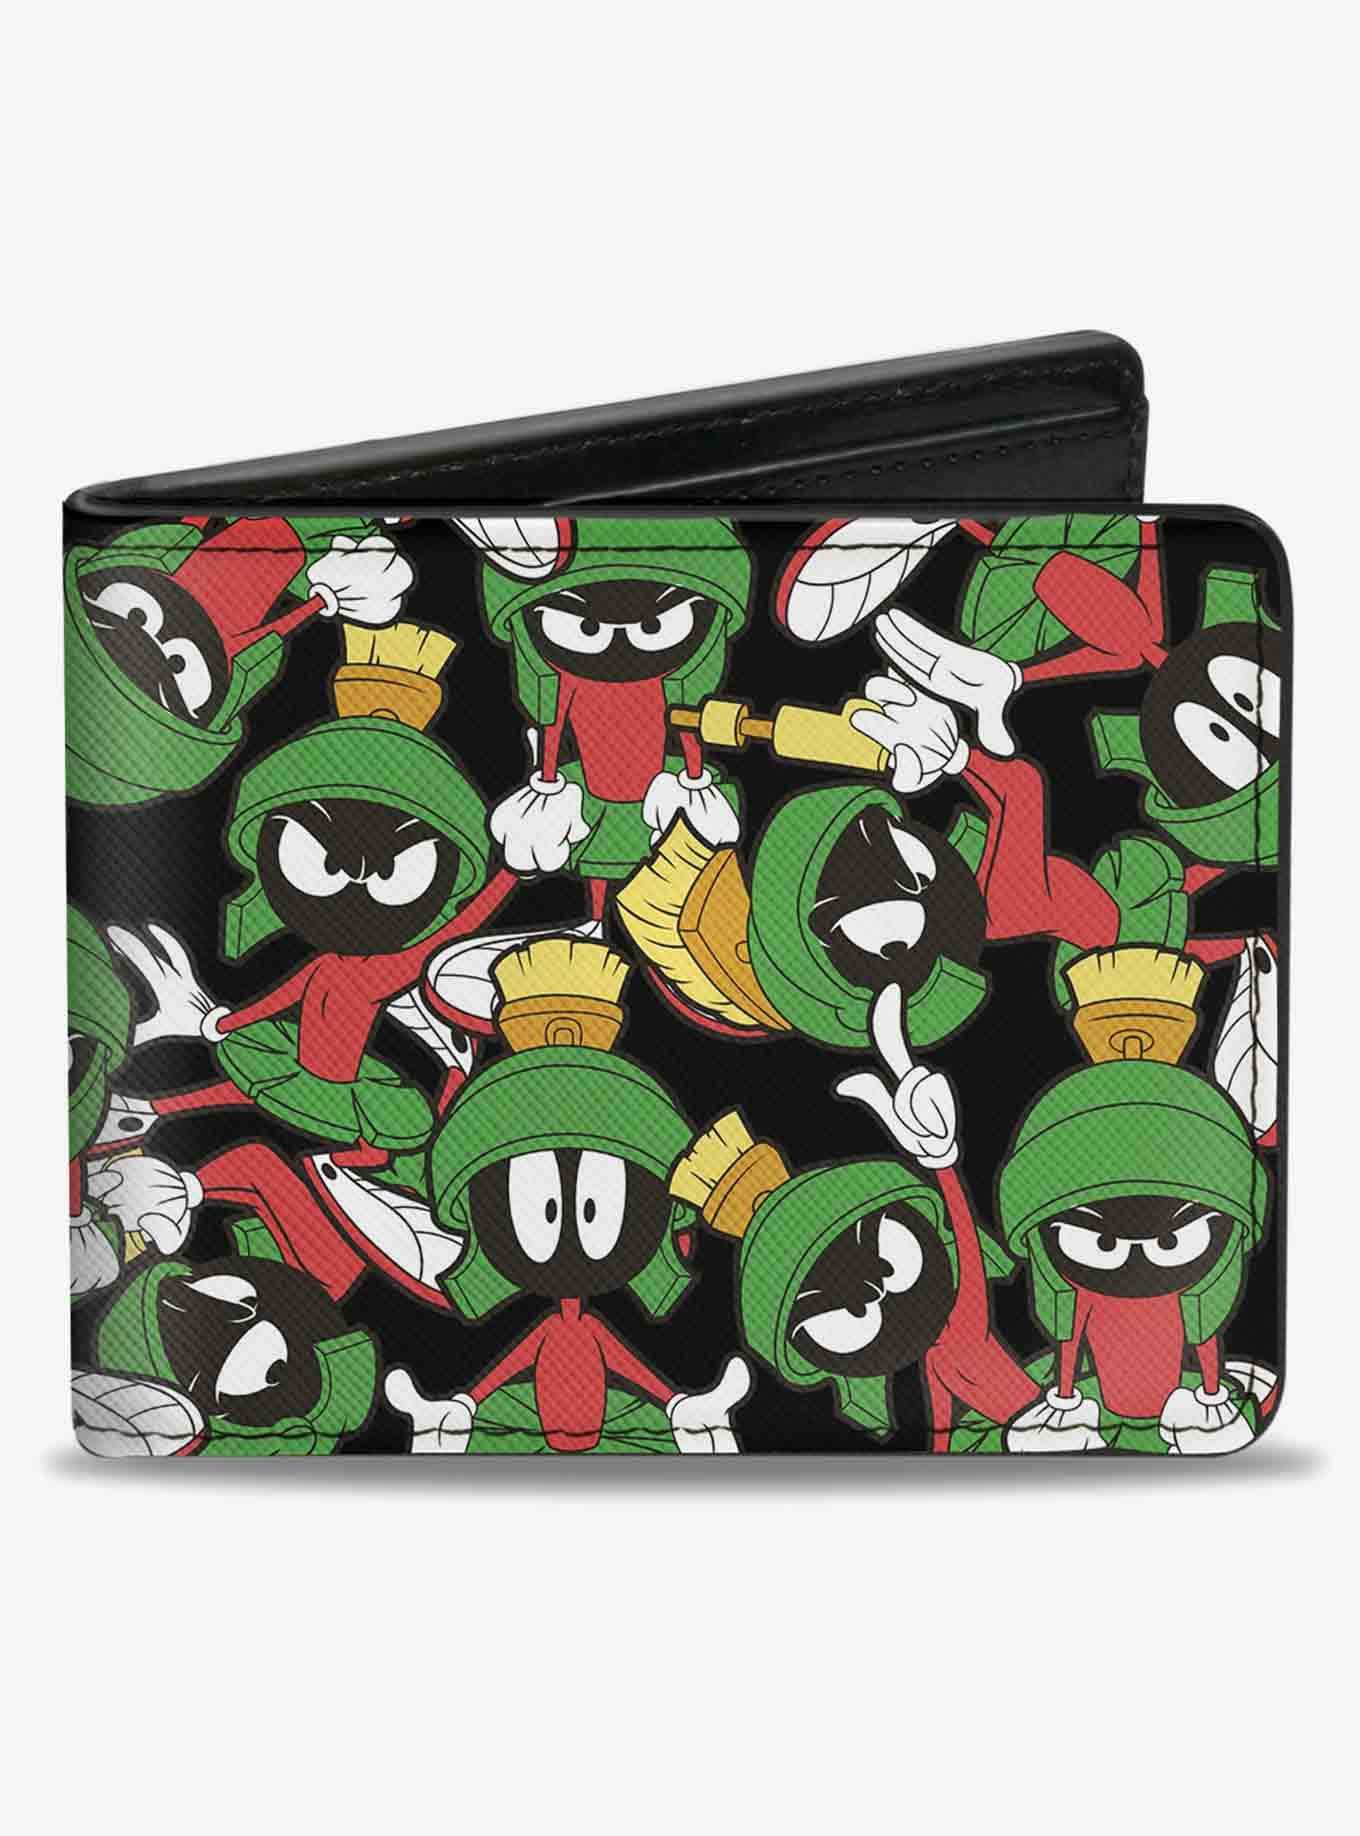 Looney Tunes Marvin The Martian Poses ScatteBifold Wallet, , hi-res